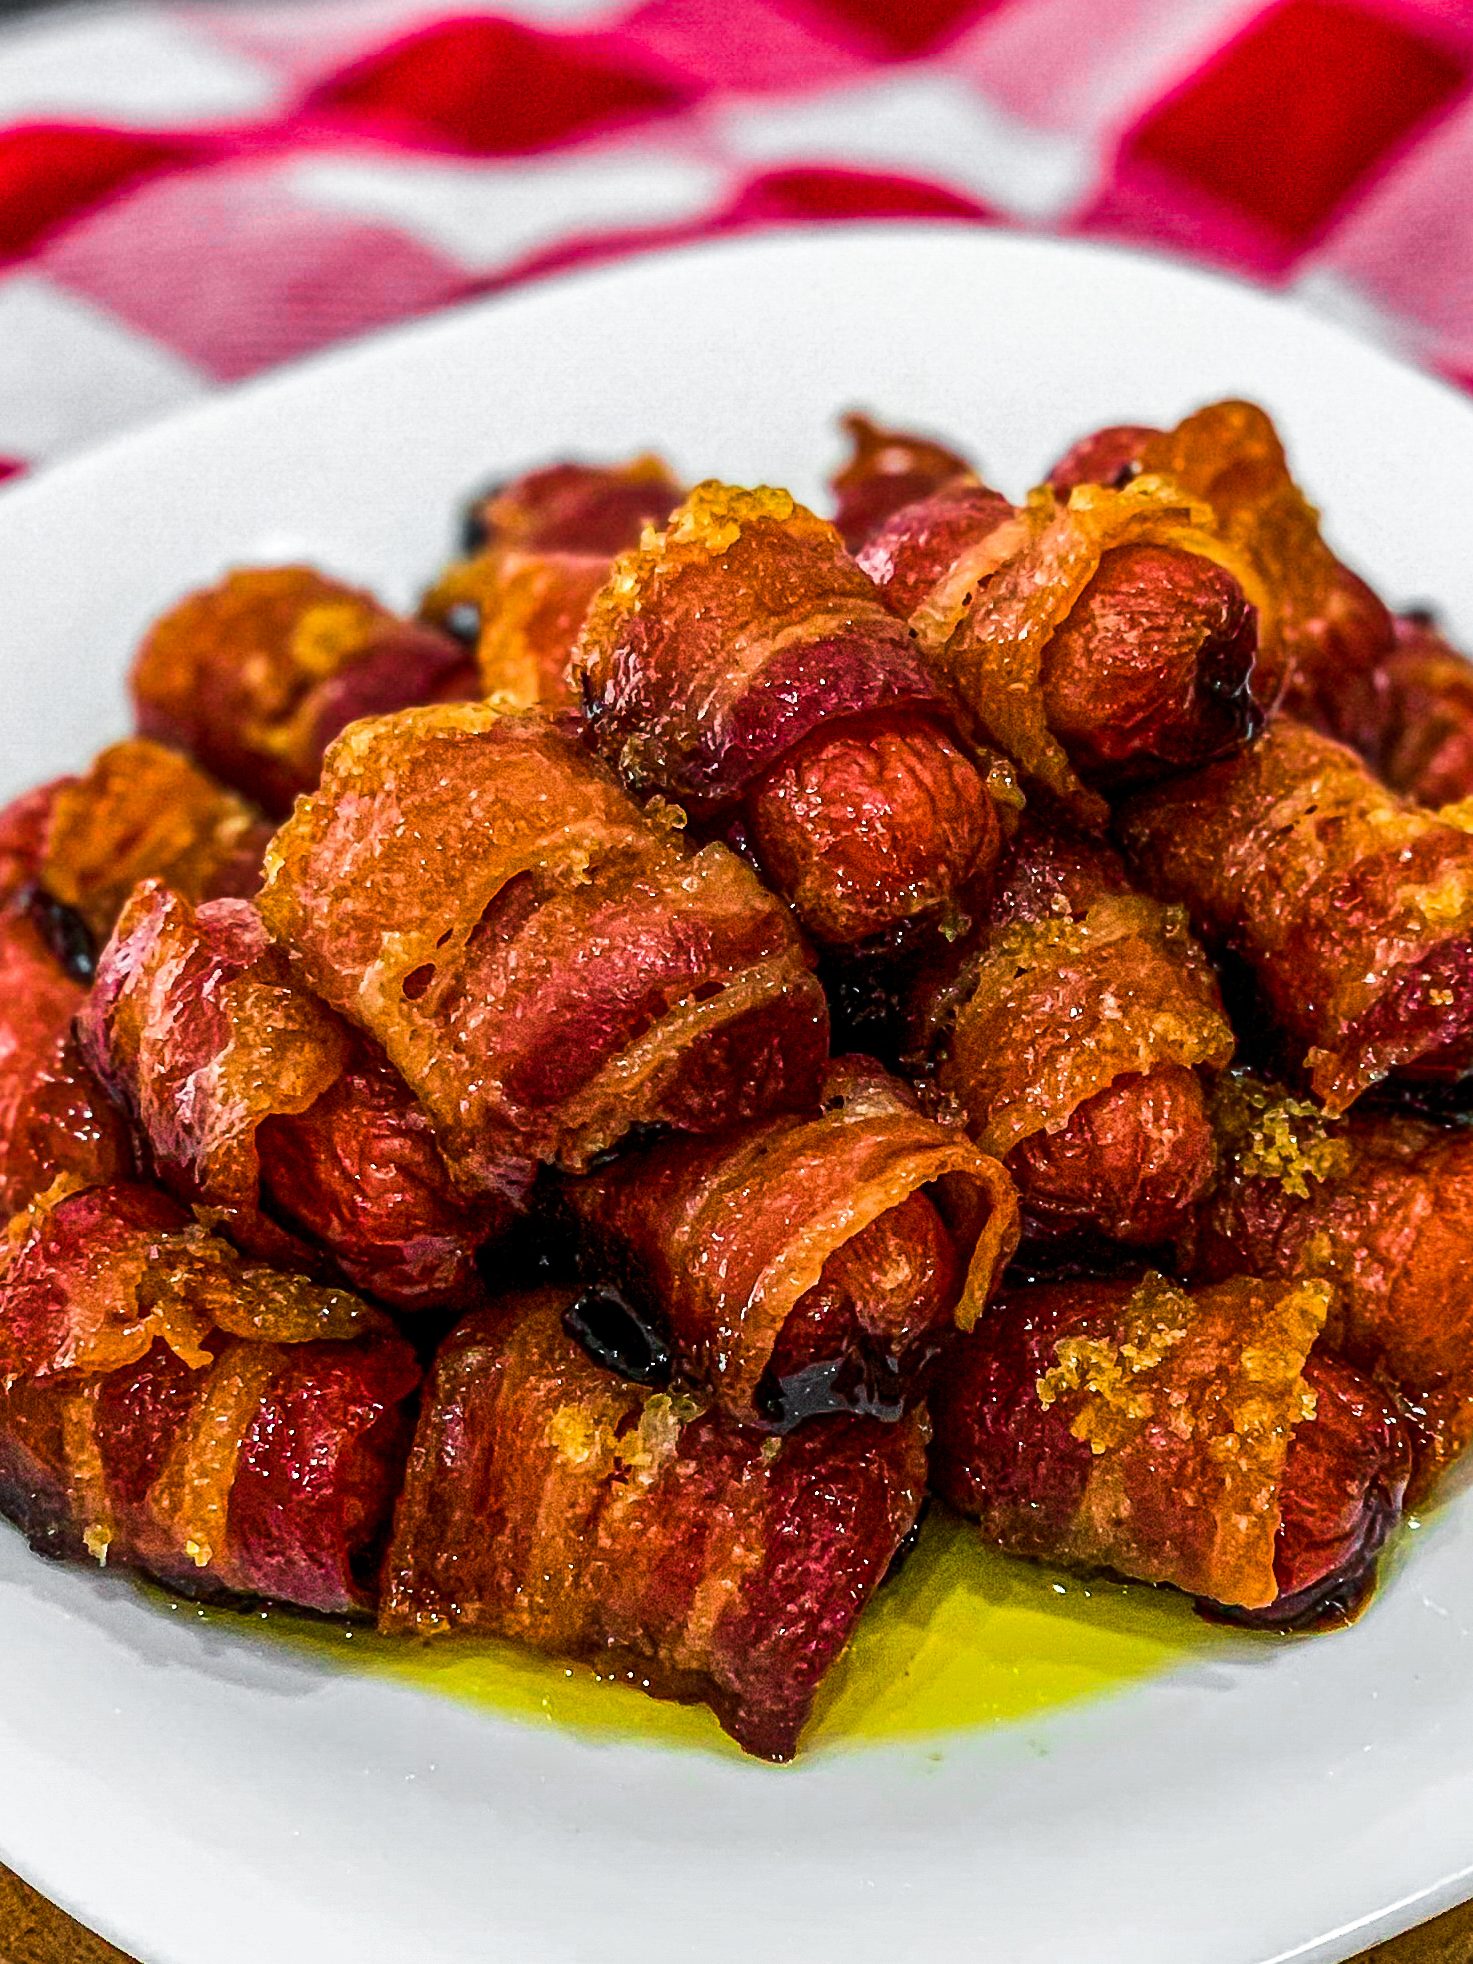 Bacon Wrapped Smokies With Brown Sugar and Butter